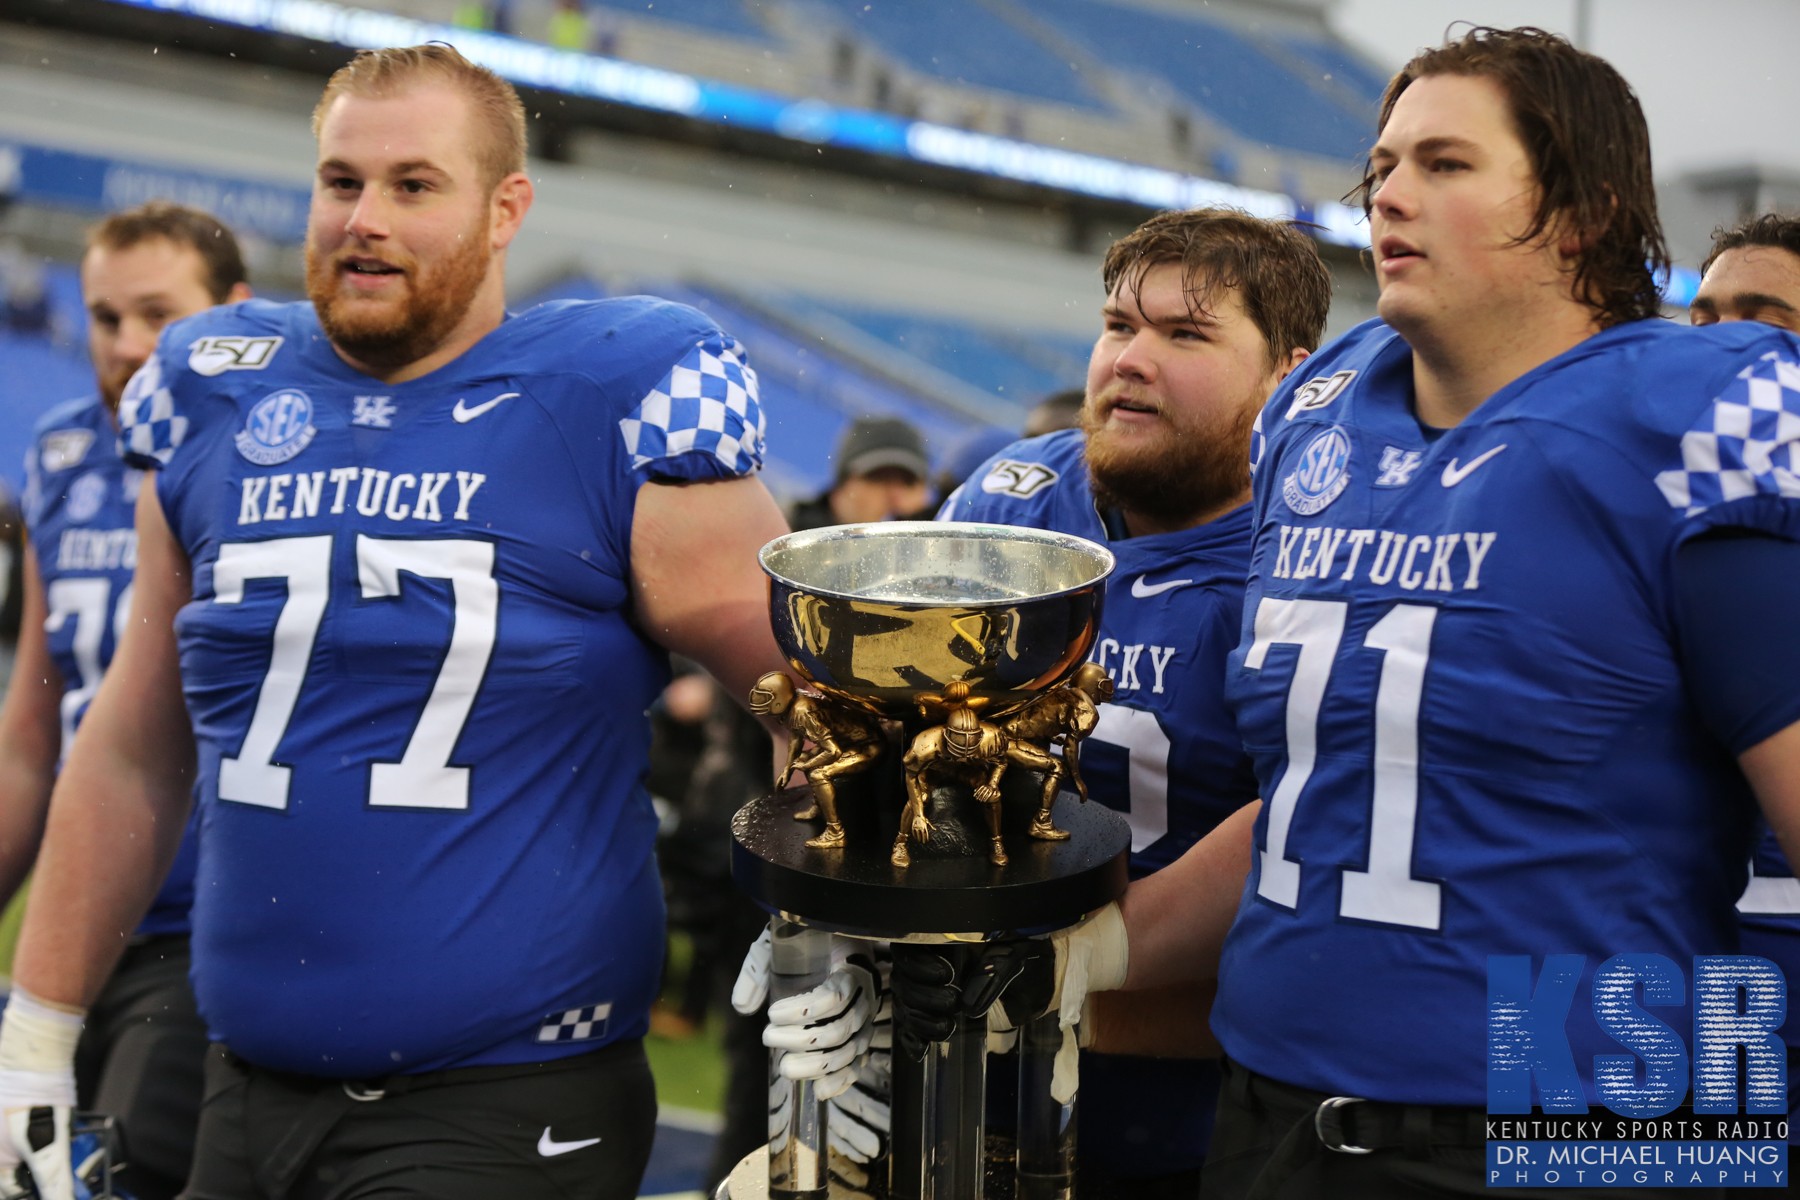 The recognition Kentucky’s offensive line deserves